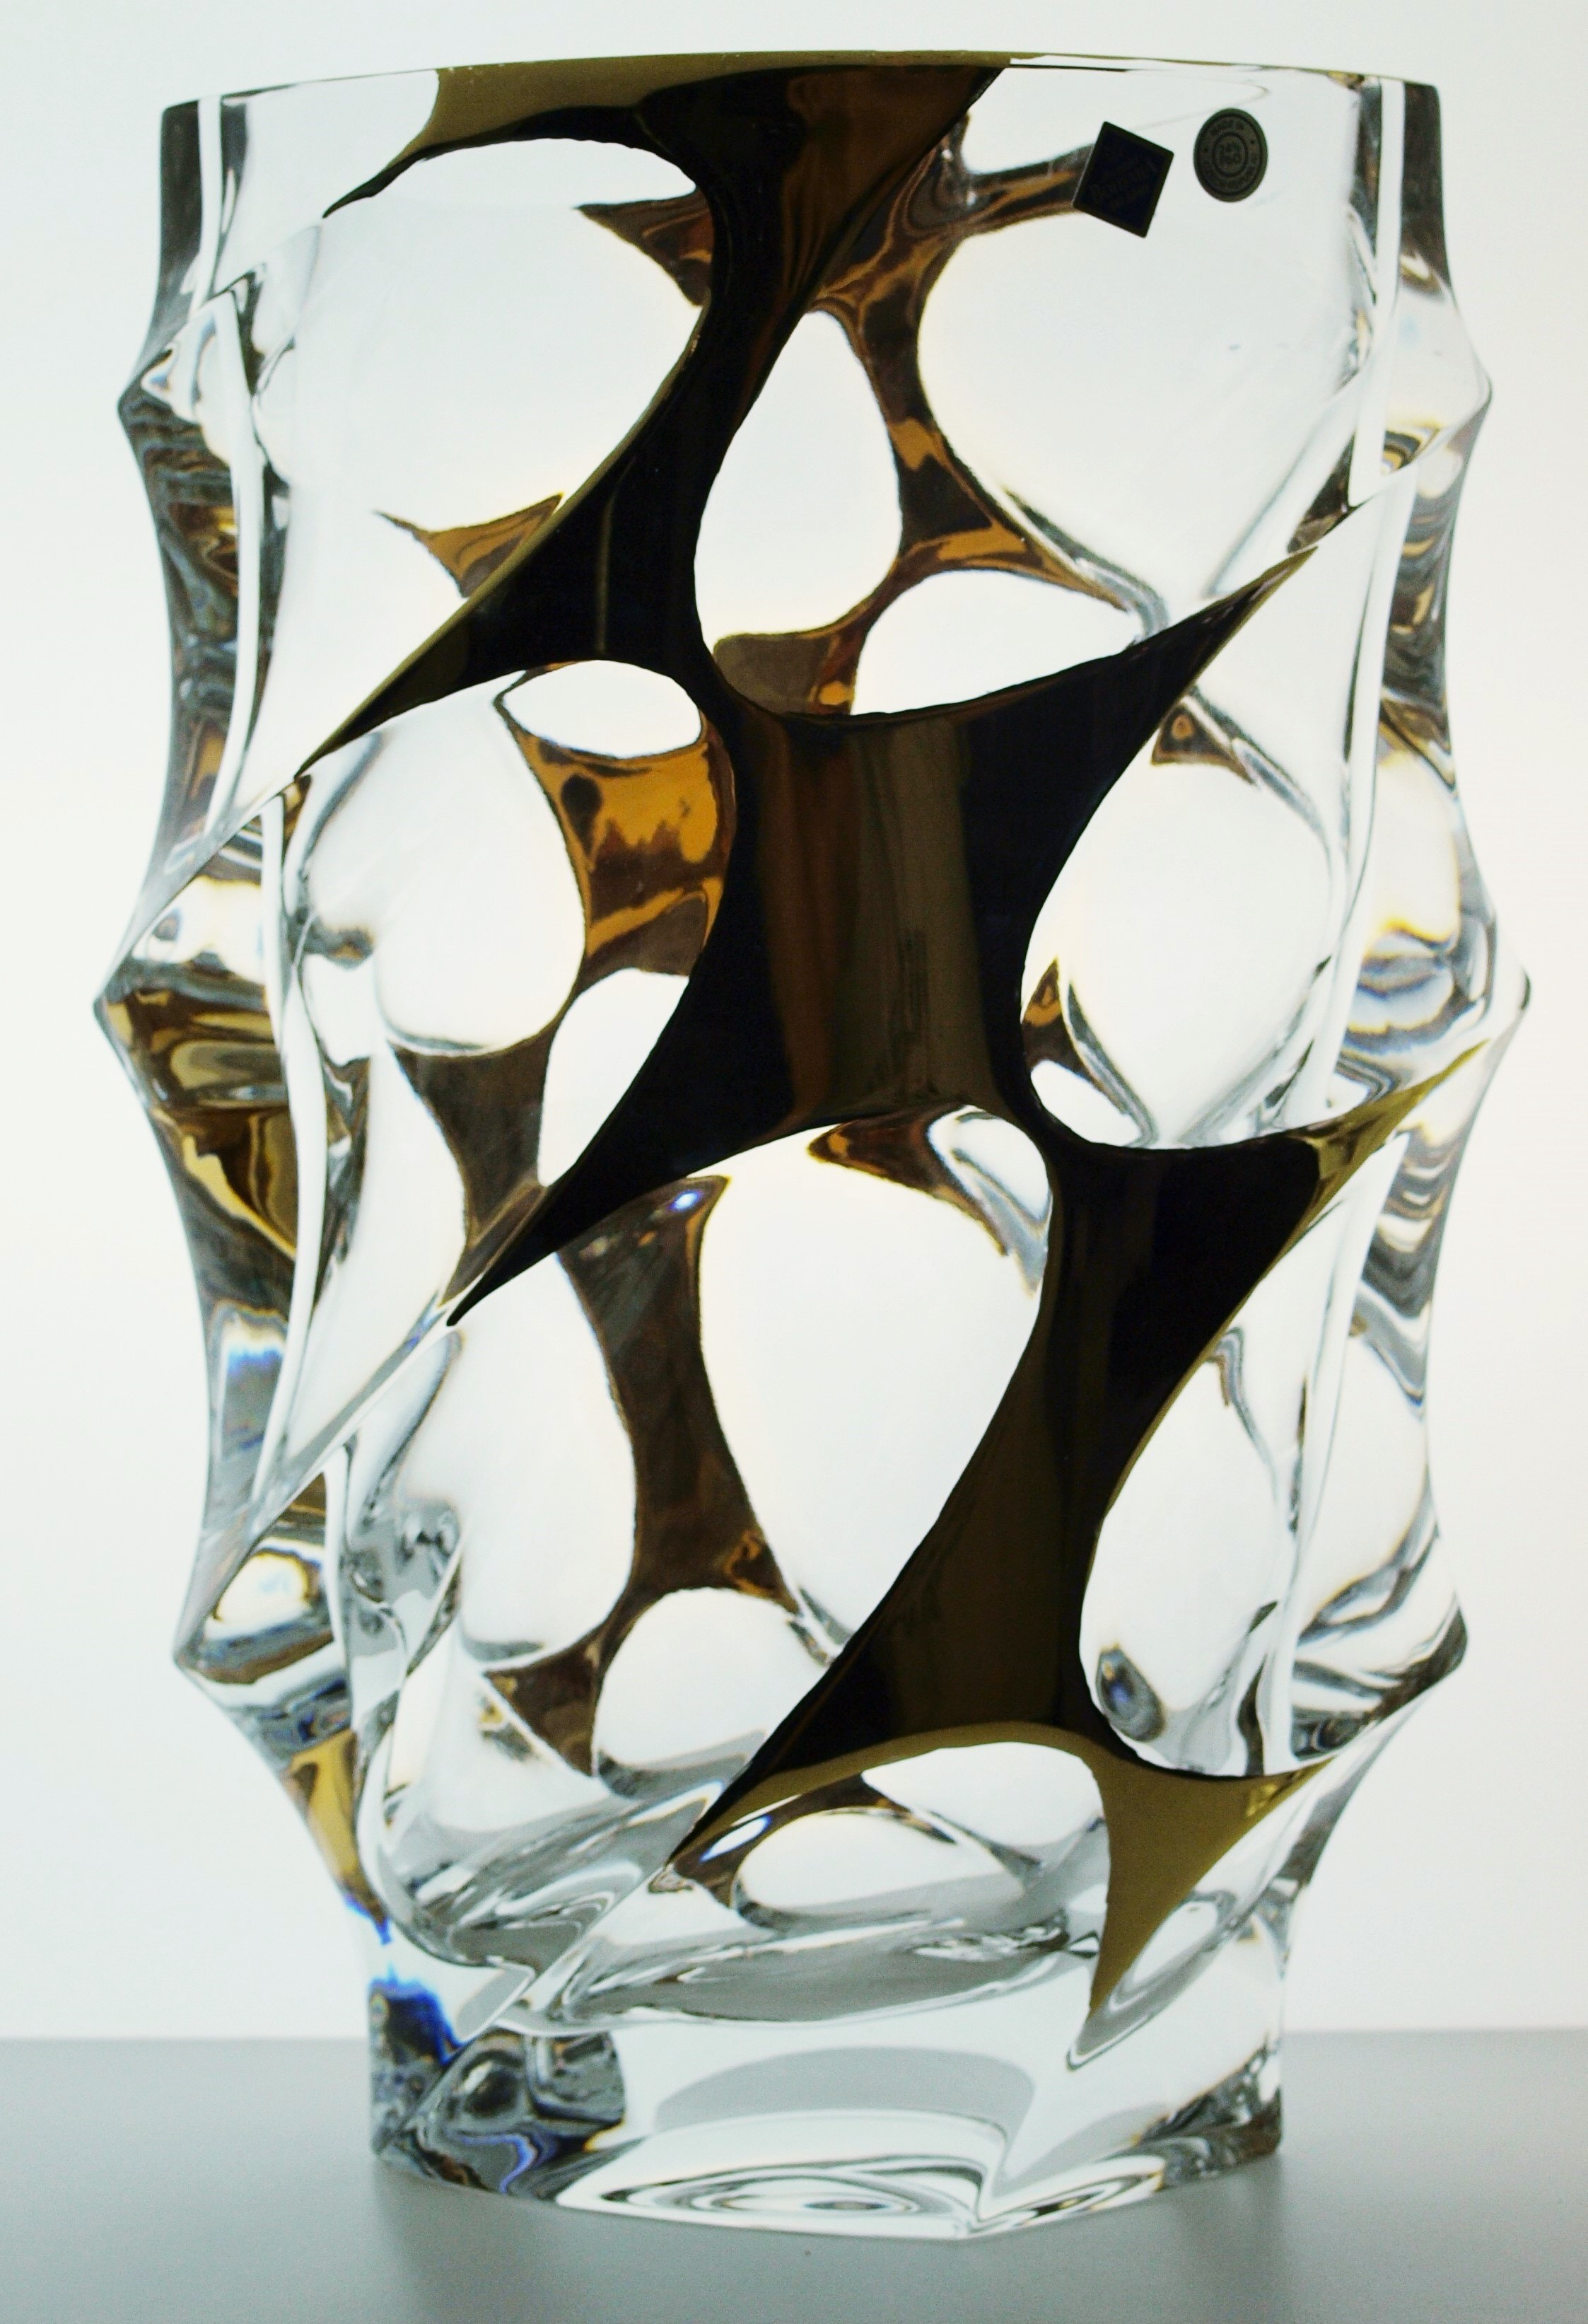 19 Recommended Ceska Crystal Vase 2024 free download ceska crystal vase of gold glass vase with unique modern design made from full lead crystal within glass vase calypso gold